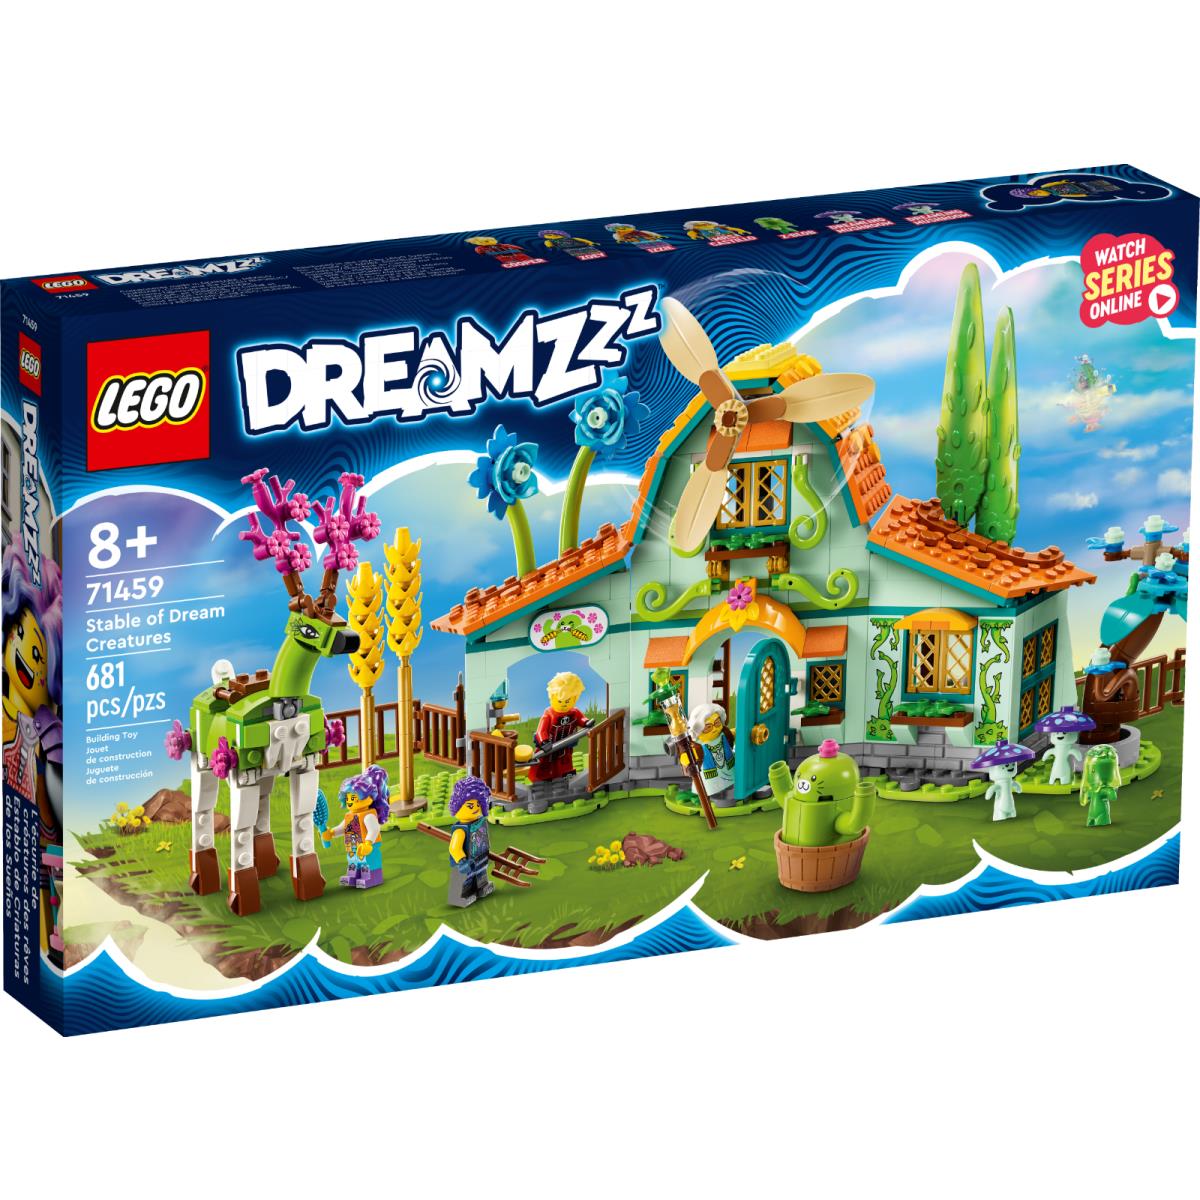 Lego Stable of Dream Creatures 71459 Dreamzzz